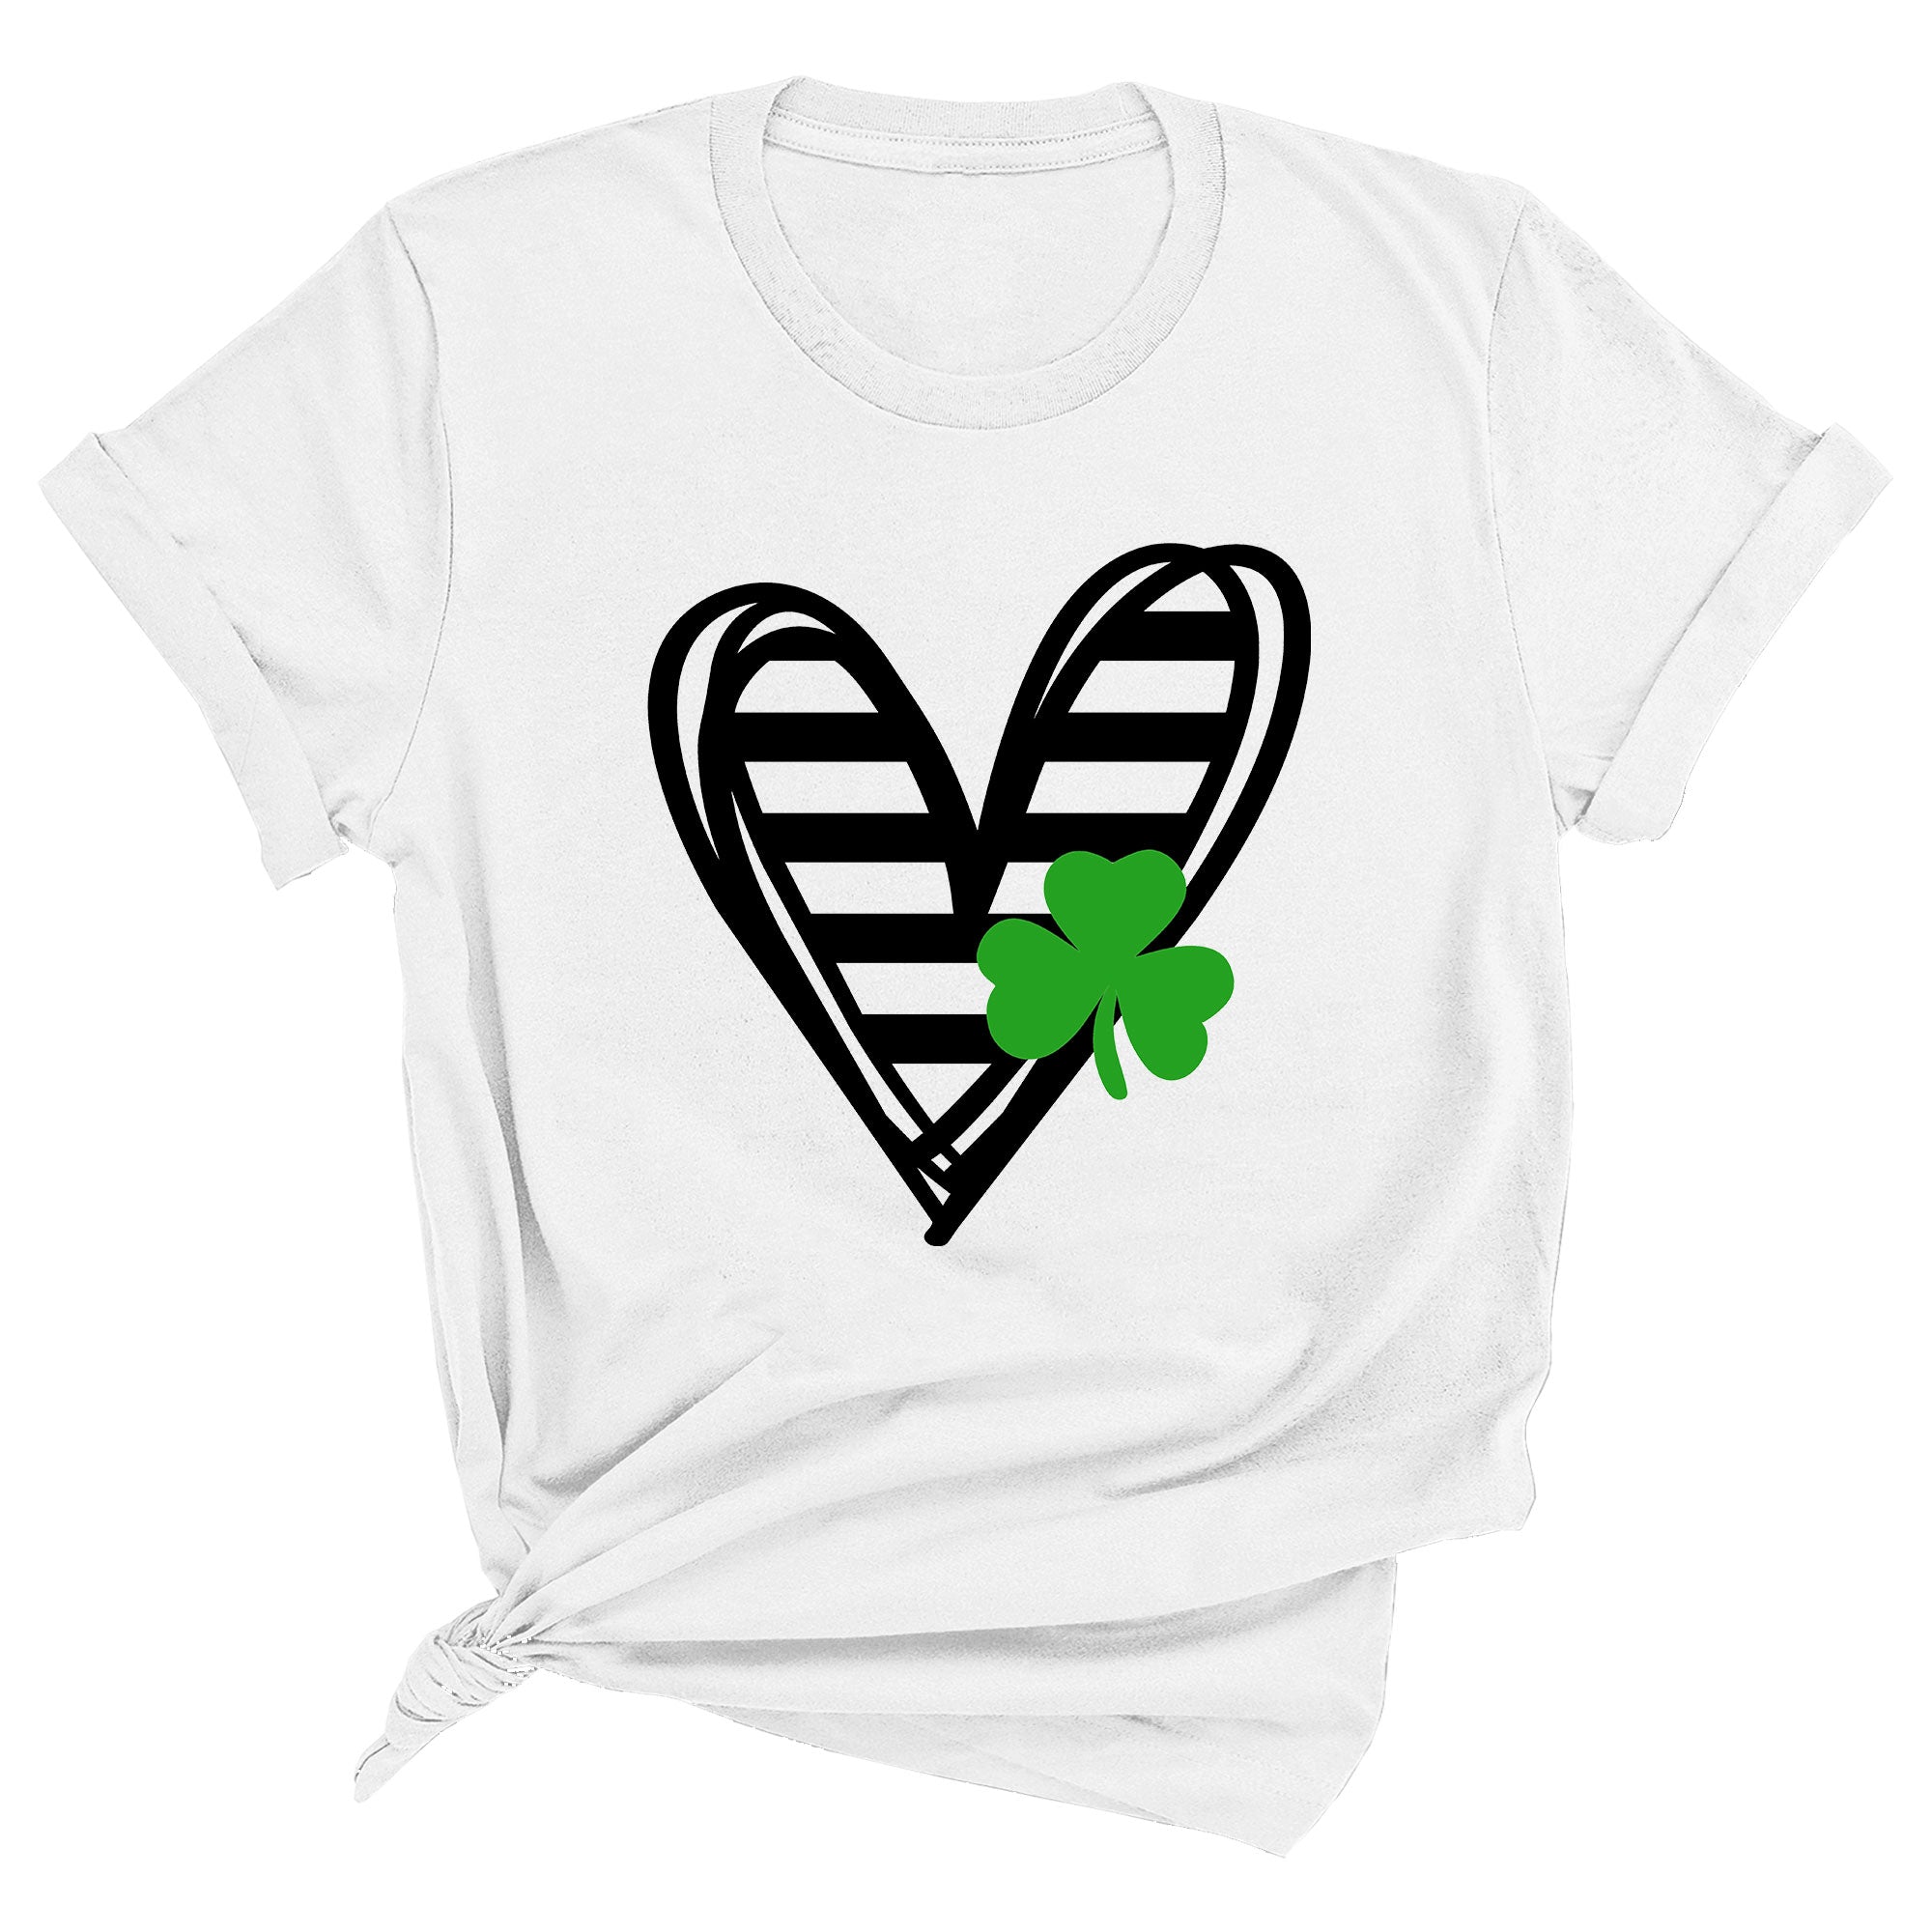 Striped Heart with Clover Premium Unisex T-Shirt